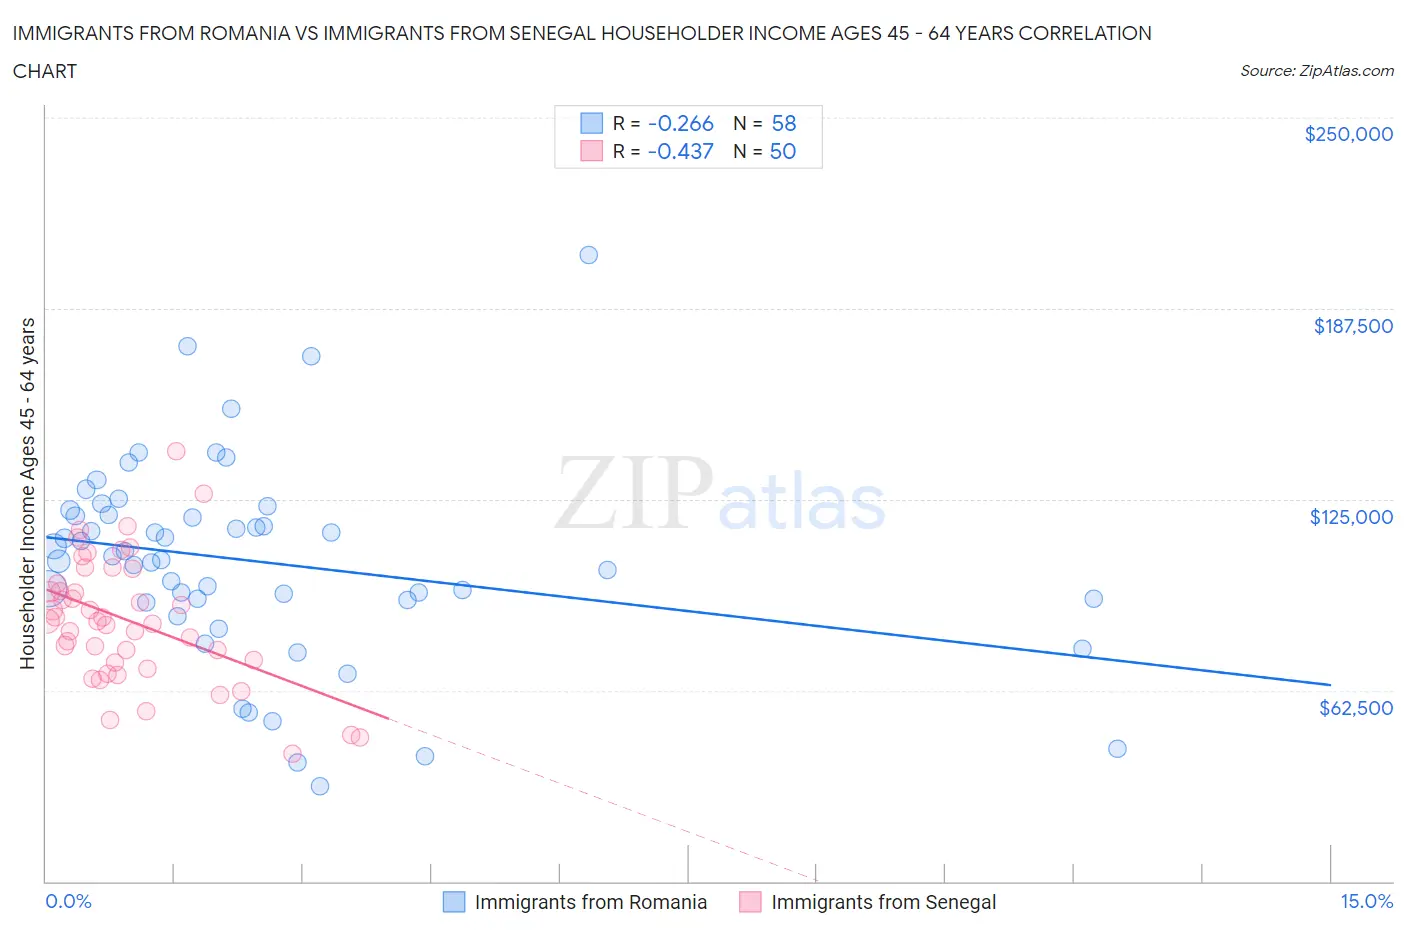 Immigrants from Romania vs Immigrants from Senegal Householder Income Ages 45 - 64 years